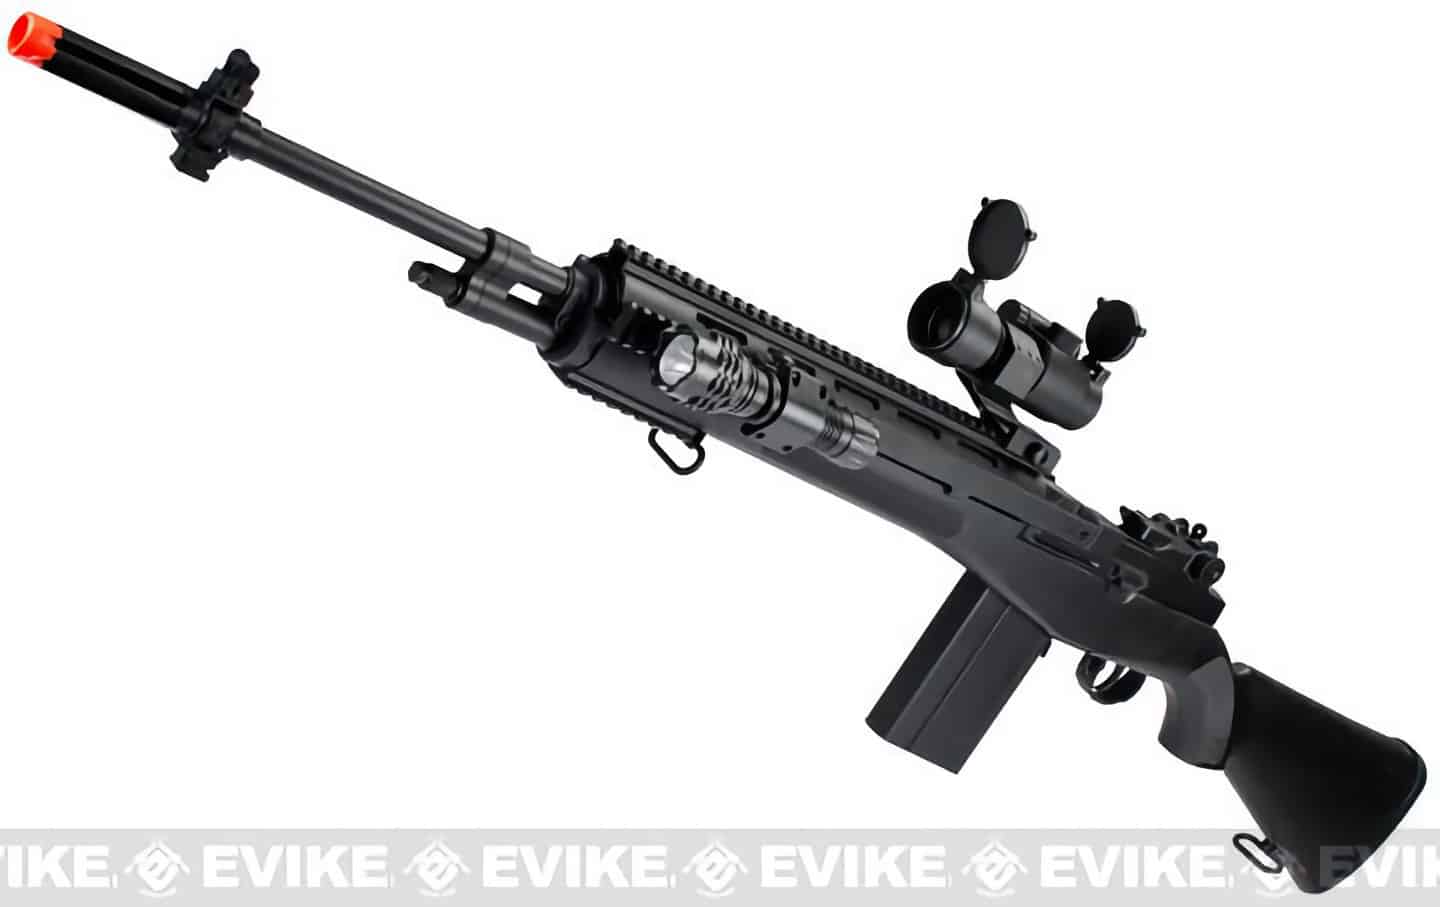 AGM M14 Full Size Airsoft Spring Powered Sniper Rifle